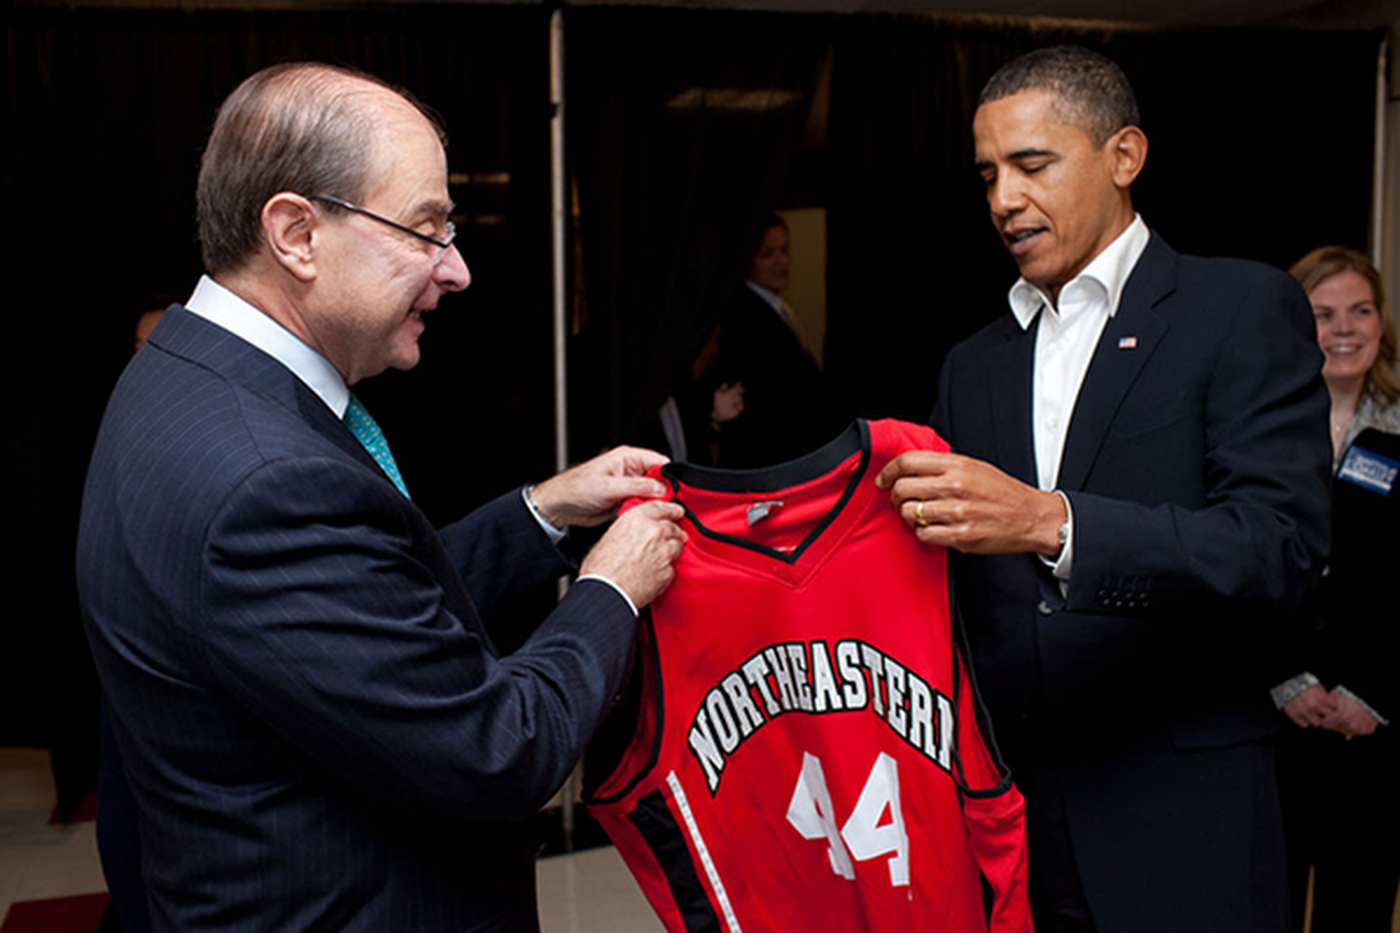 President Barack Obama is given a Northeastern #44 basketball jersey from Northeastern President Joseph E. Aoun prior to the event at Cabot Center. Official White House Photo by Pete Souza 